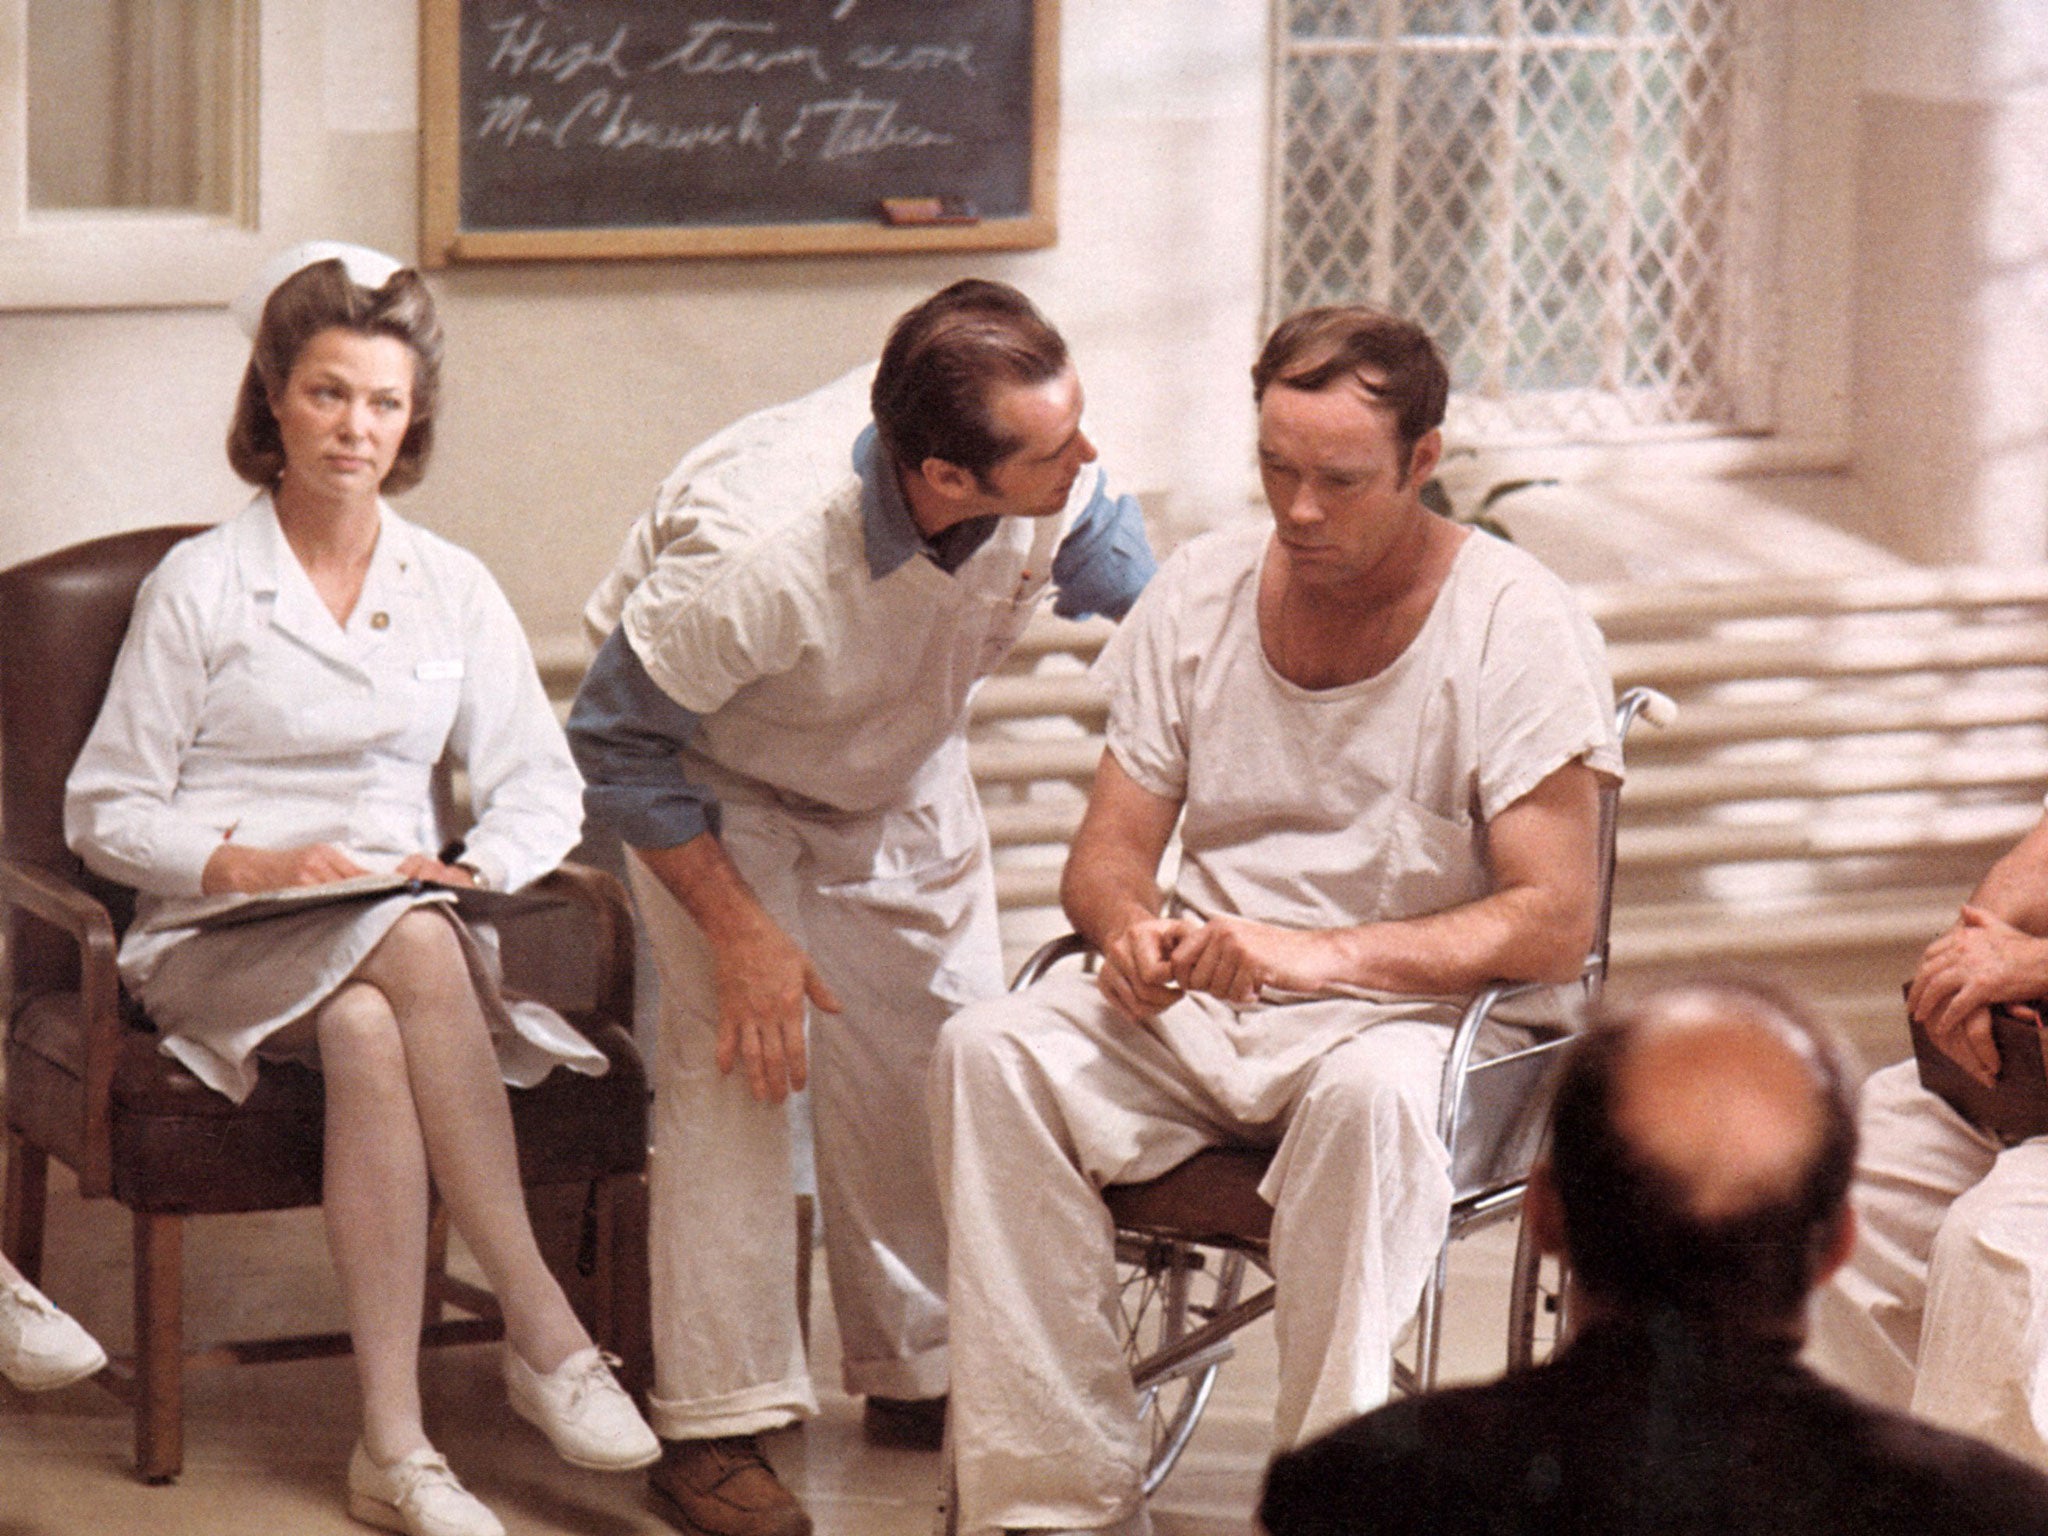 Fletcher with Jack Nicholson and Ted Markland in One Flew Over the Cuckoo’s Nest